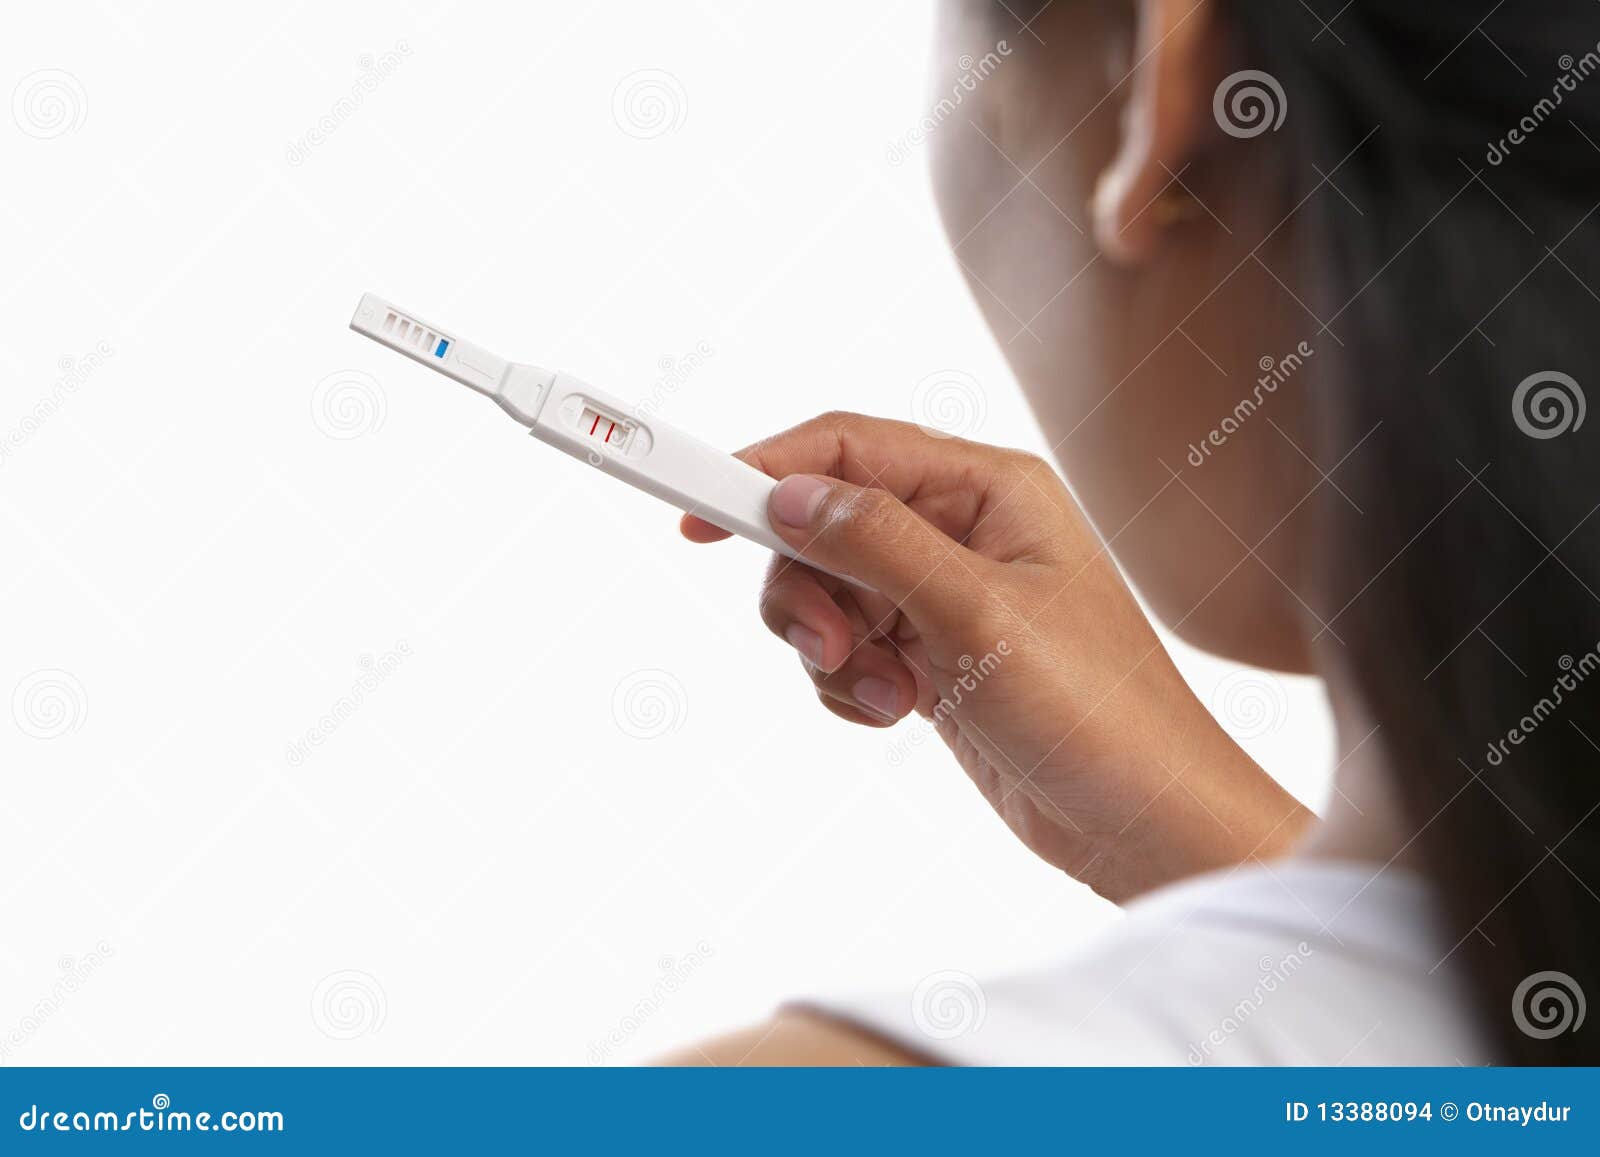 looking at pregnancy test result